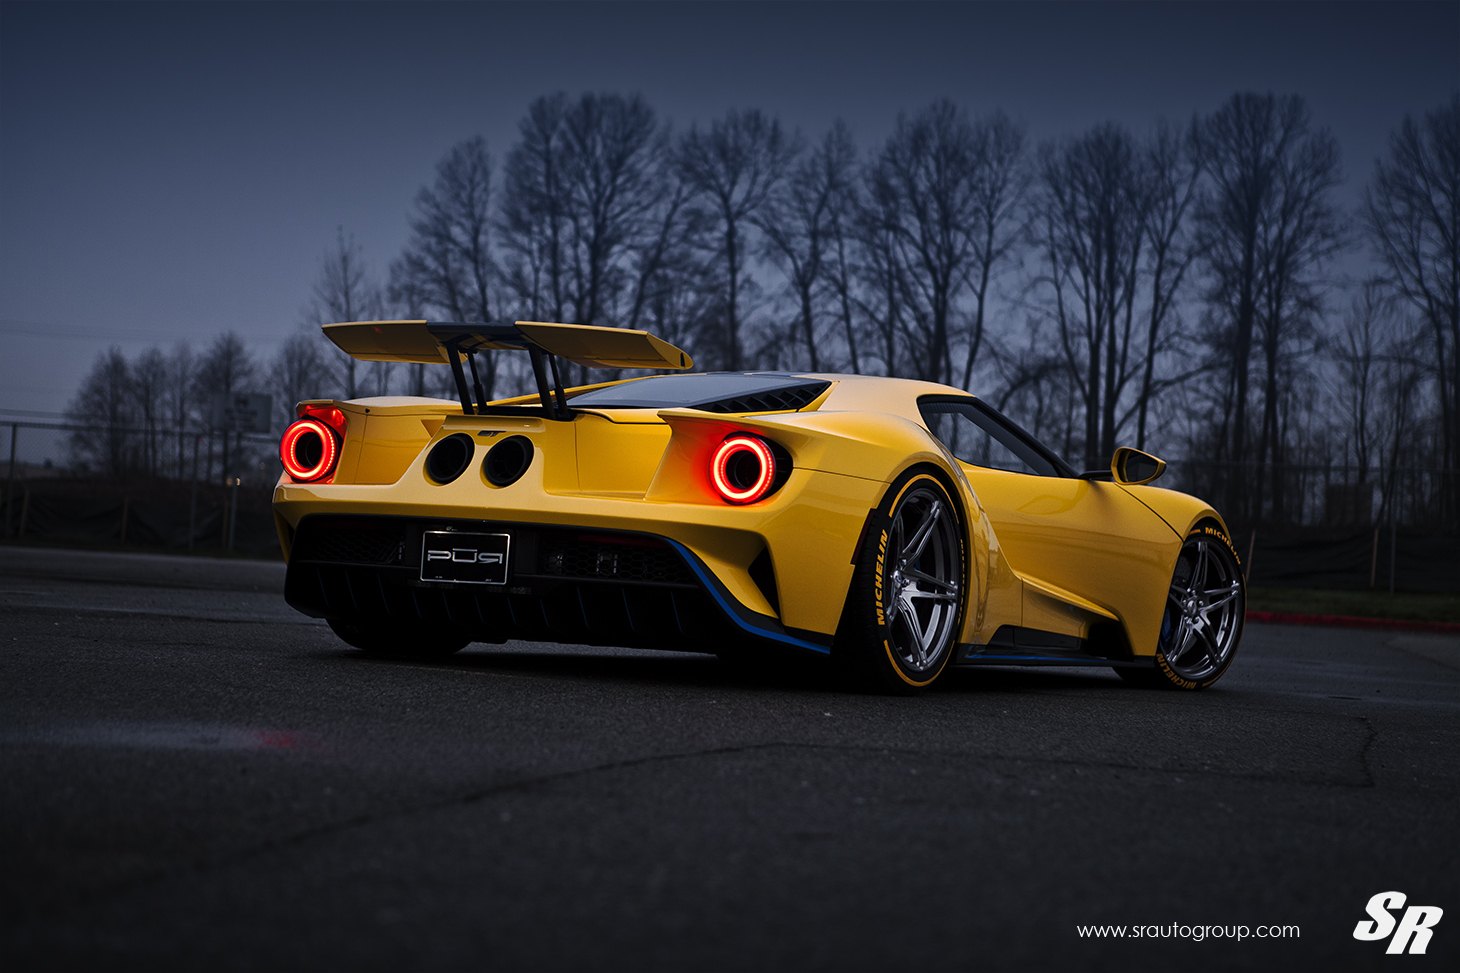 Large Wing Spoiler on Yellow Ford GT - Photo by SR Auto Group